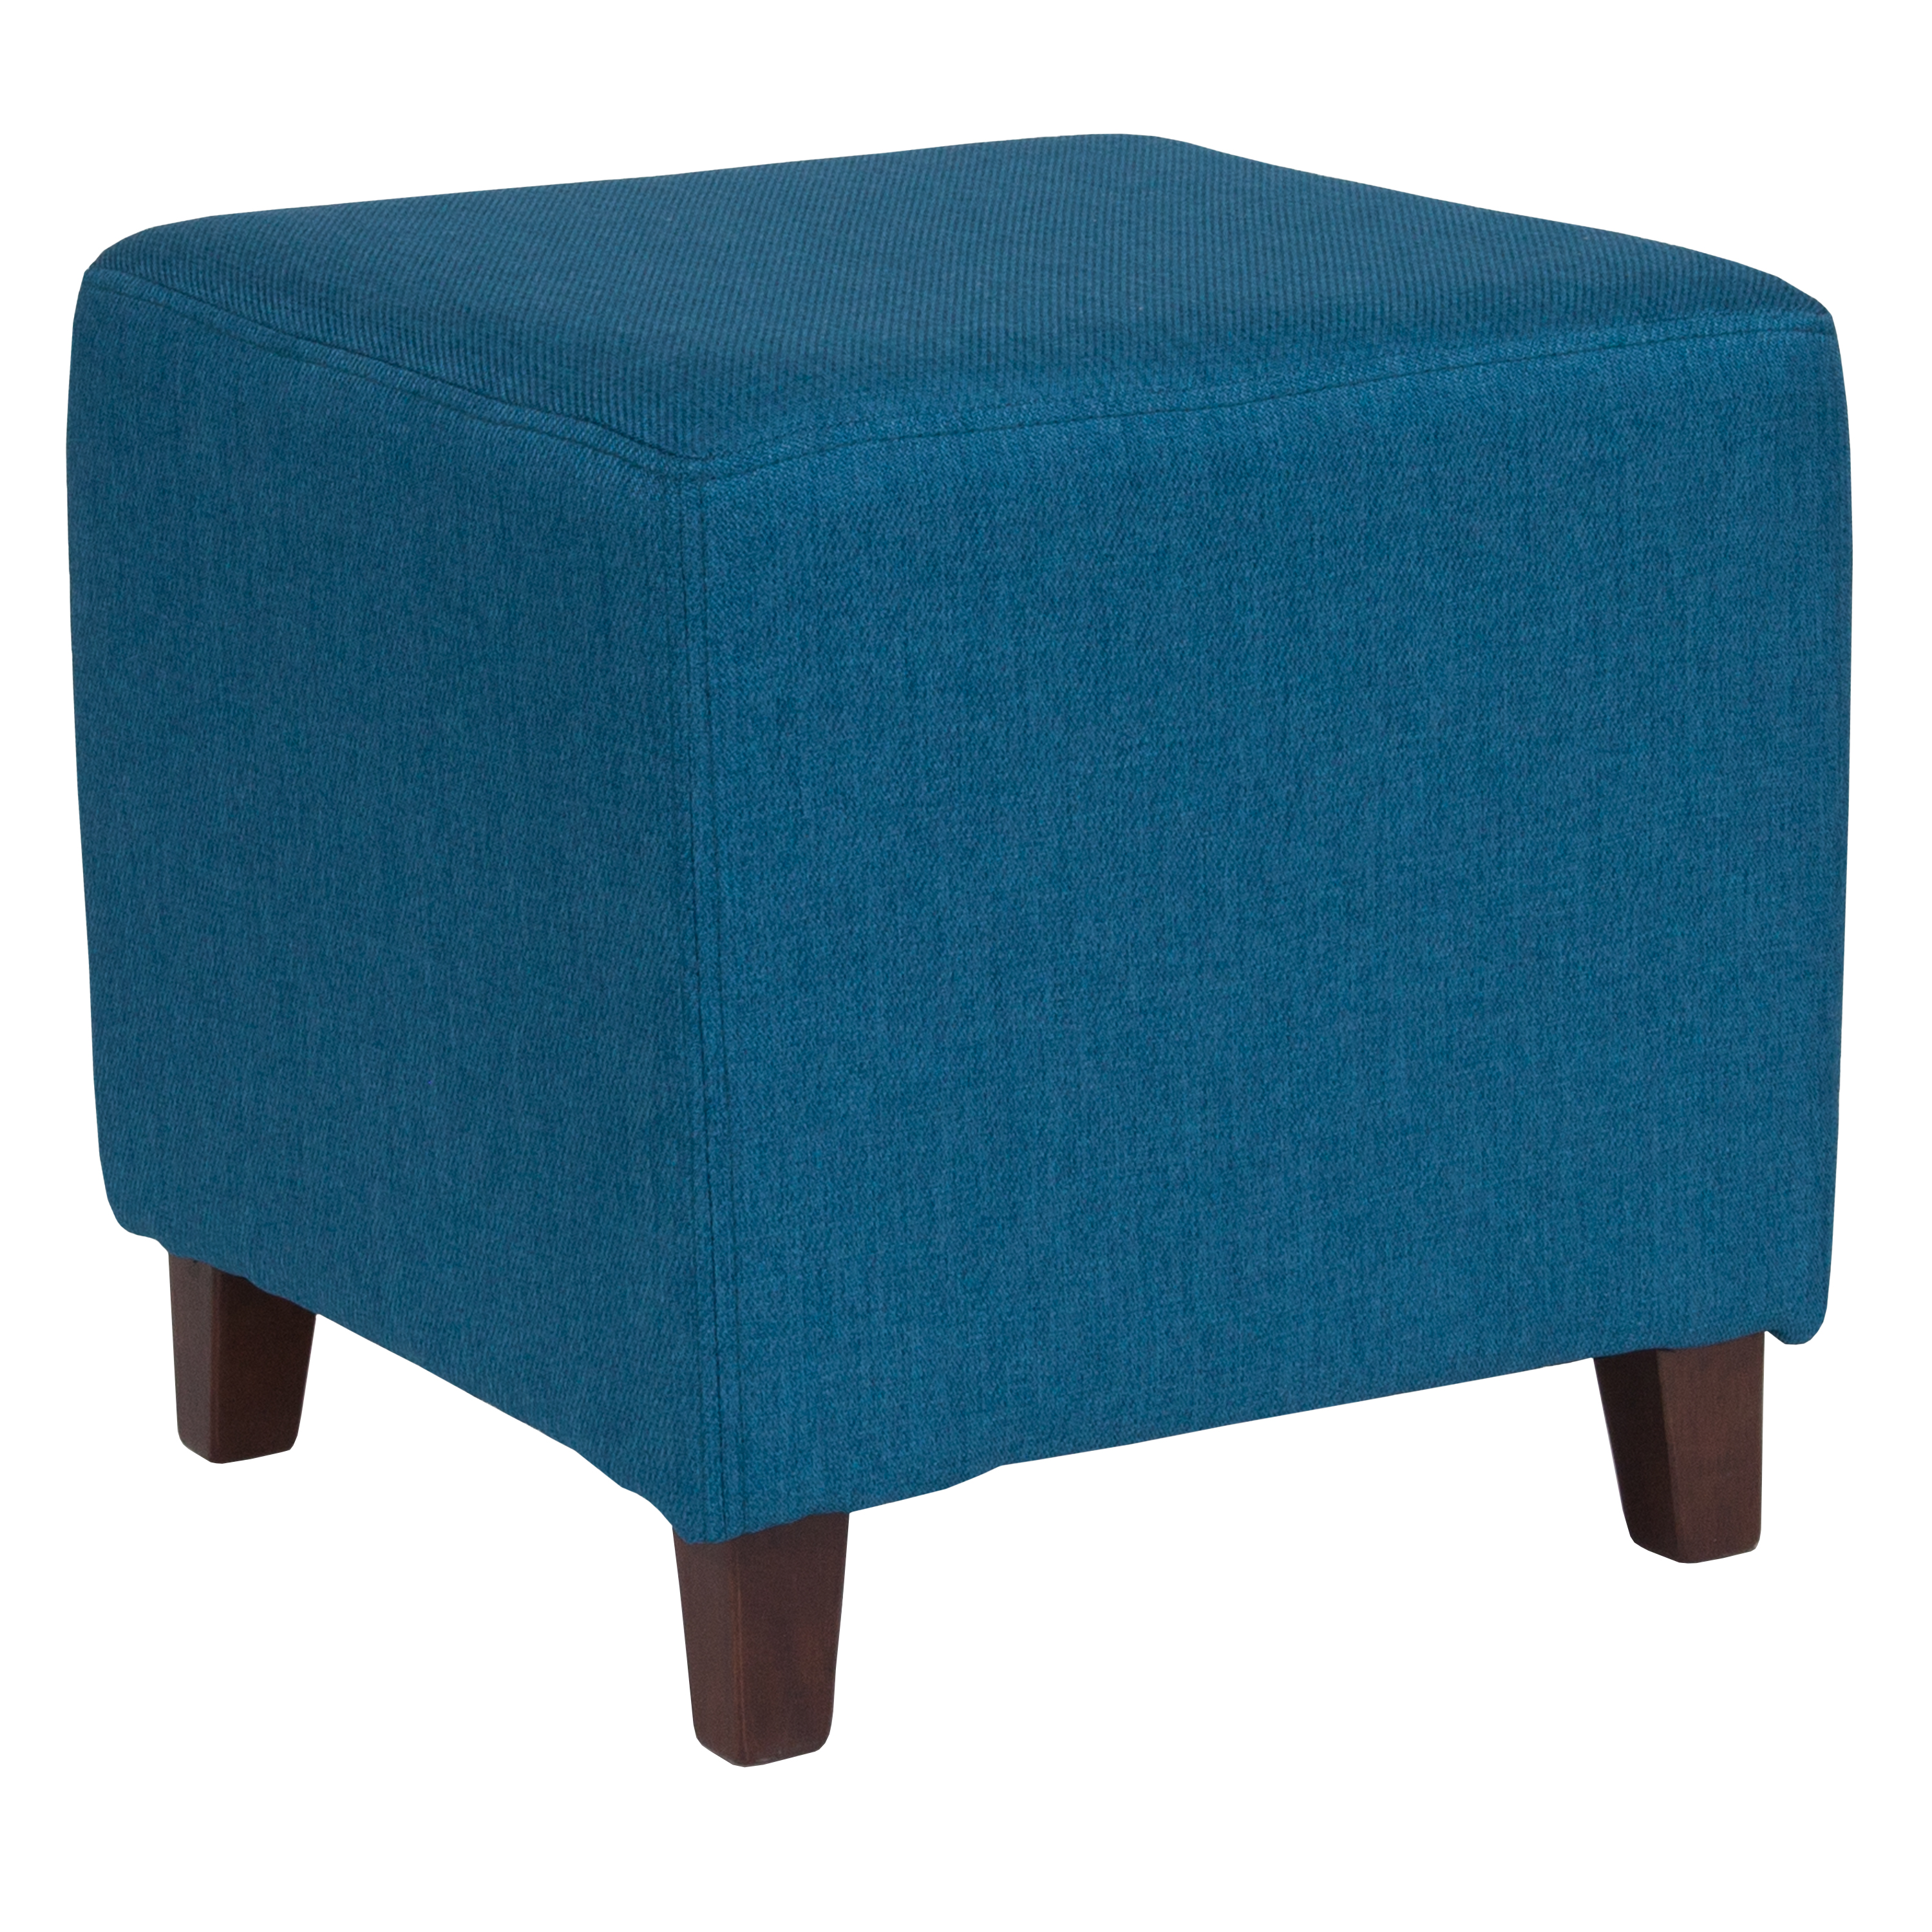 Flash Furniture QY-S09-BLU-GG Blue Fabric Upholstered Ottoman Pouf